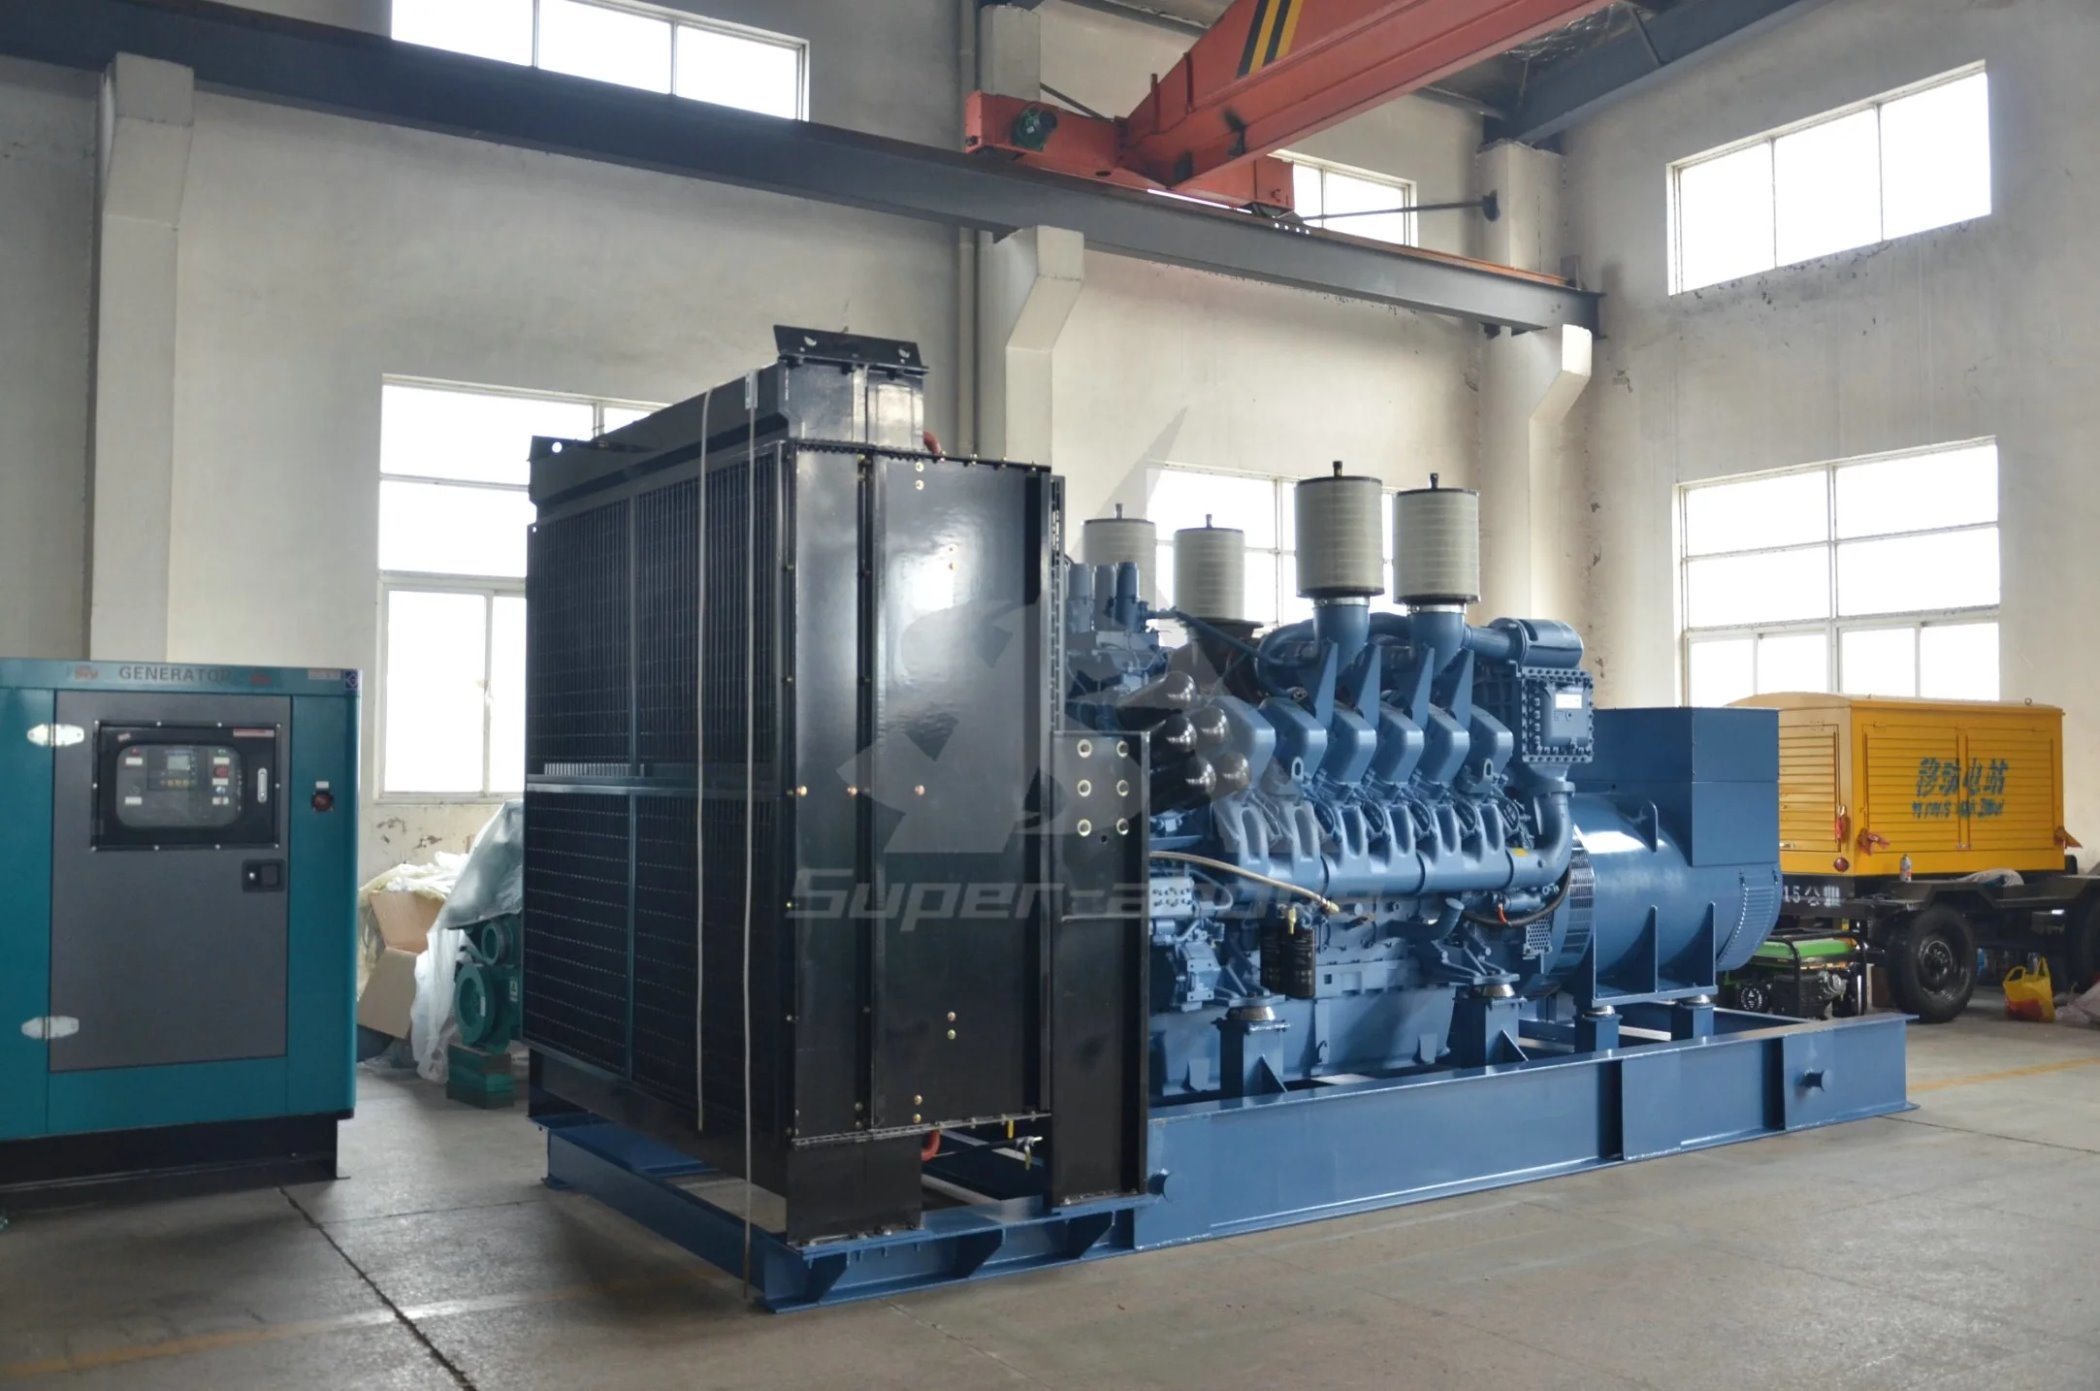 High Quality 1.2MW Mtu Diesel Generator with CE Certificaiton for Sale